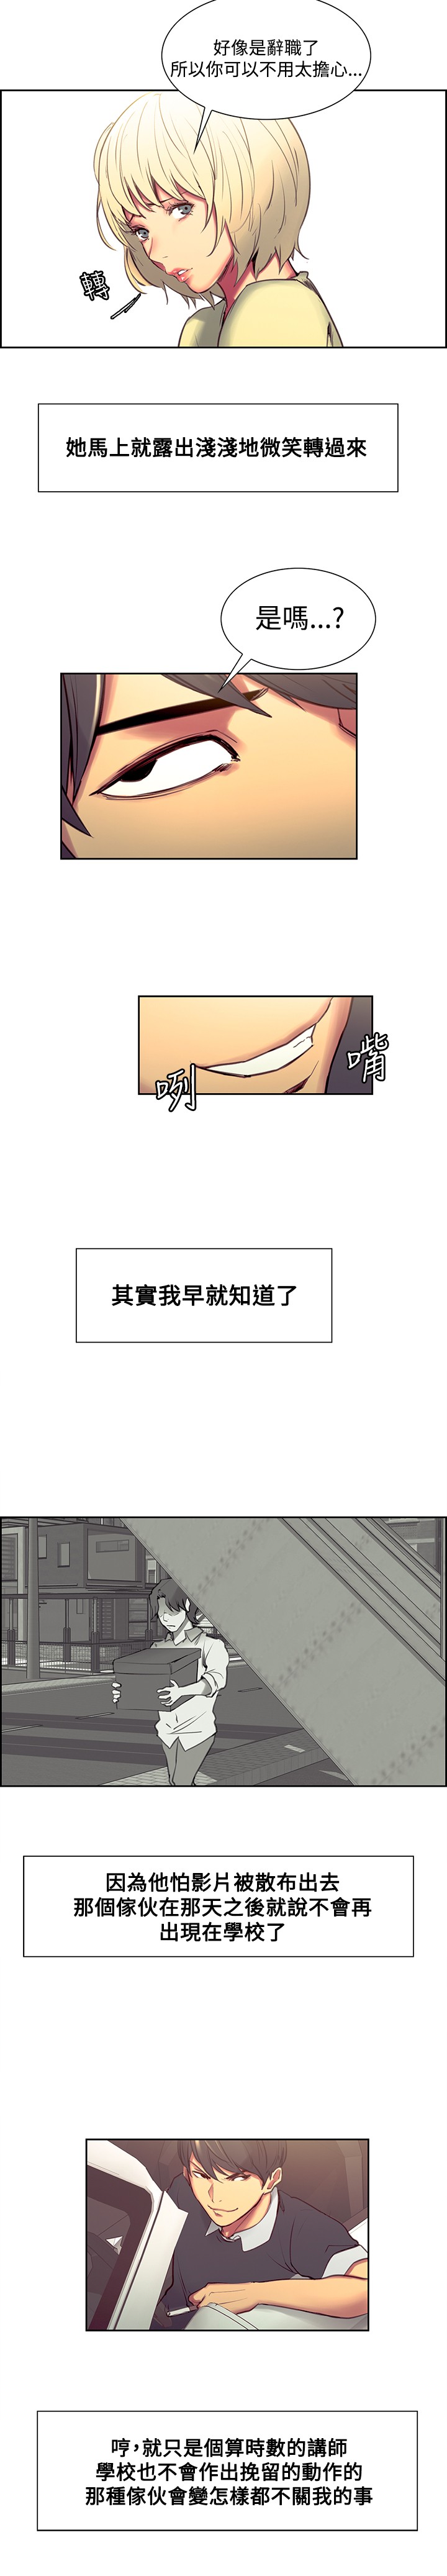 [Serious] Domesticate the Housekeeper 调教家政妇 Ch.29~41 [Chinese]中文 page 32 full